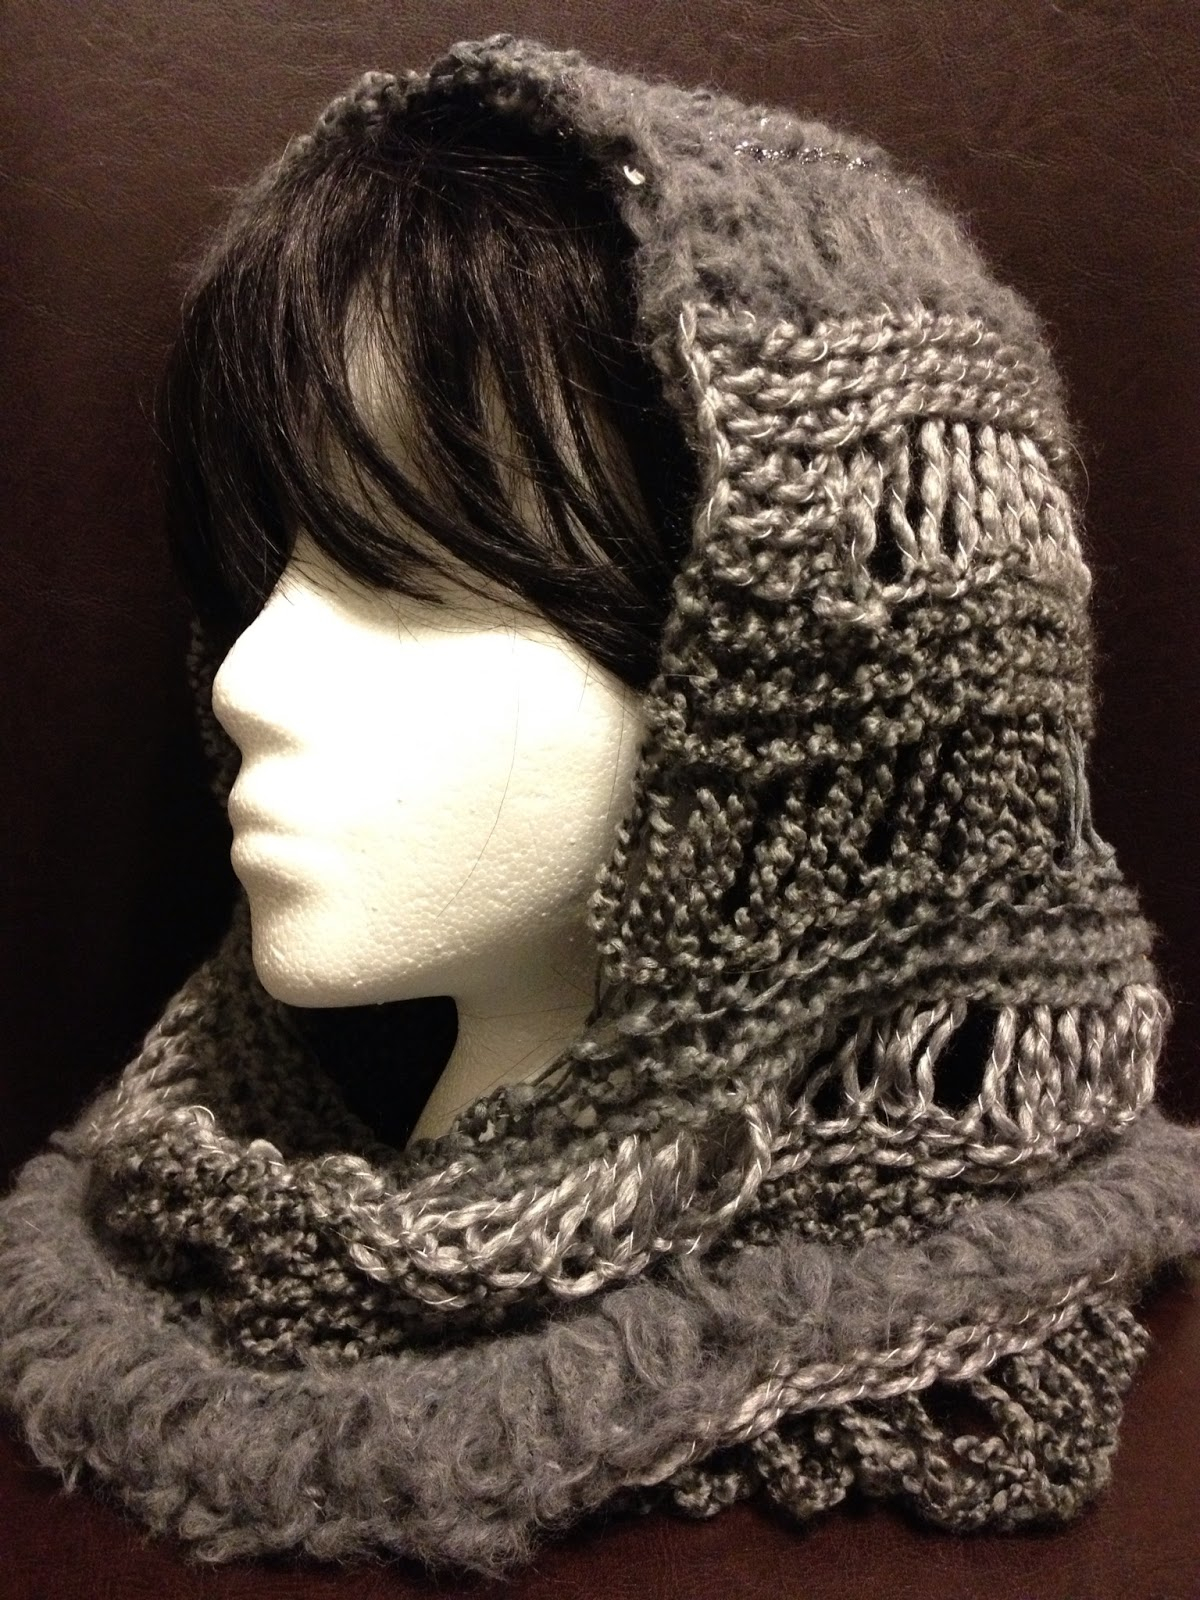 Loom Knit Hooded Scarf Pattern Charitys Loom Knits Changes Hooded Cowl